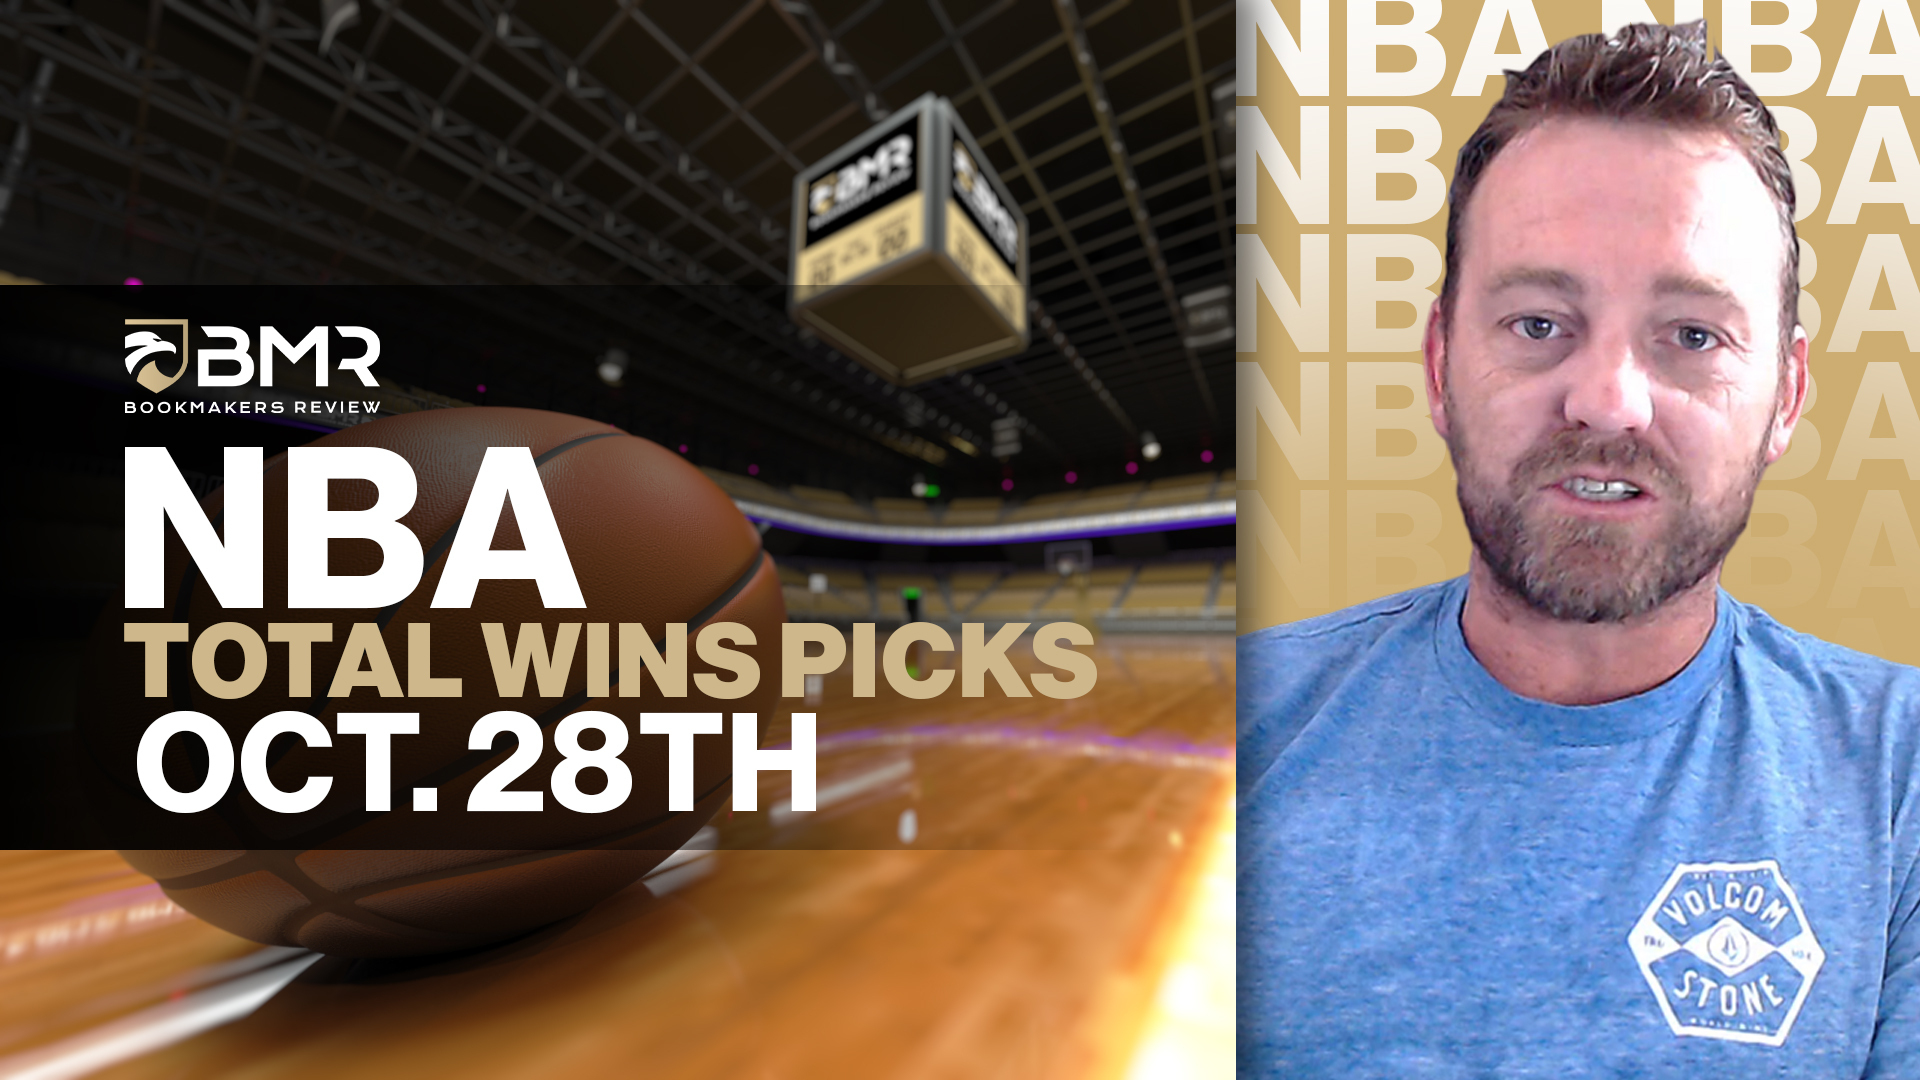 NBA Daily Picks &#8211; Best Spread, Moneyline and Total by Kyle Purviance (Oct. 28th)